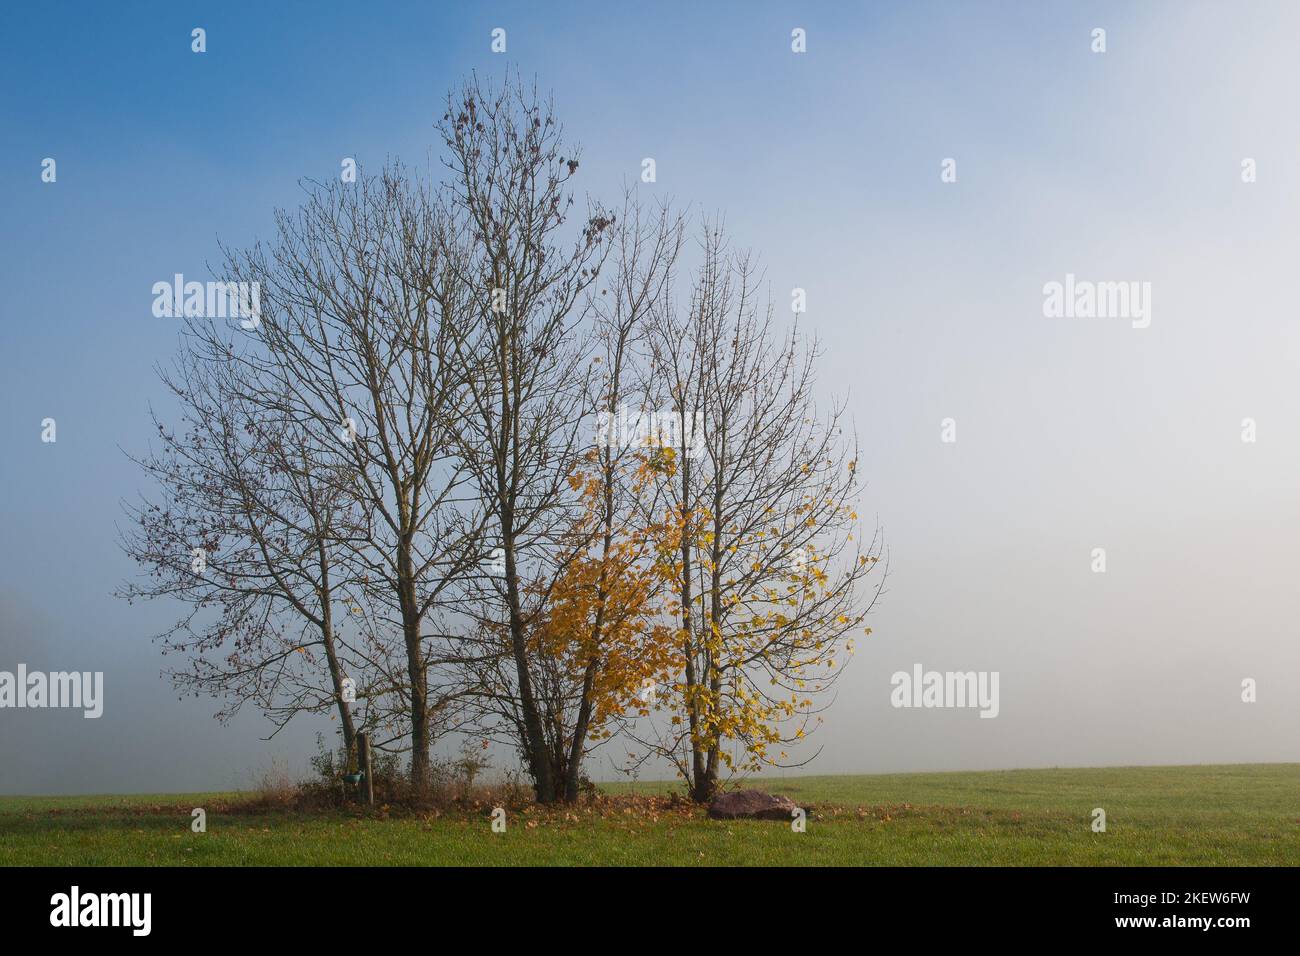 Group of trees in the rising morning mist. Autumn mood in the 'Löhrengraben' near the spa town of Bad Dürrheim in south-west Germany. Stock Photo